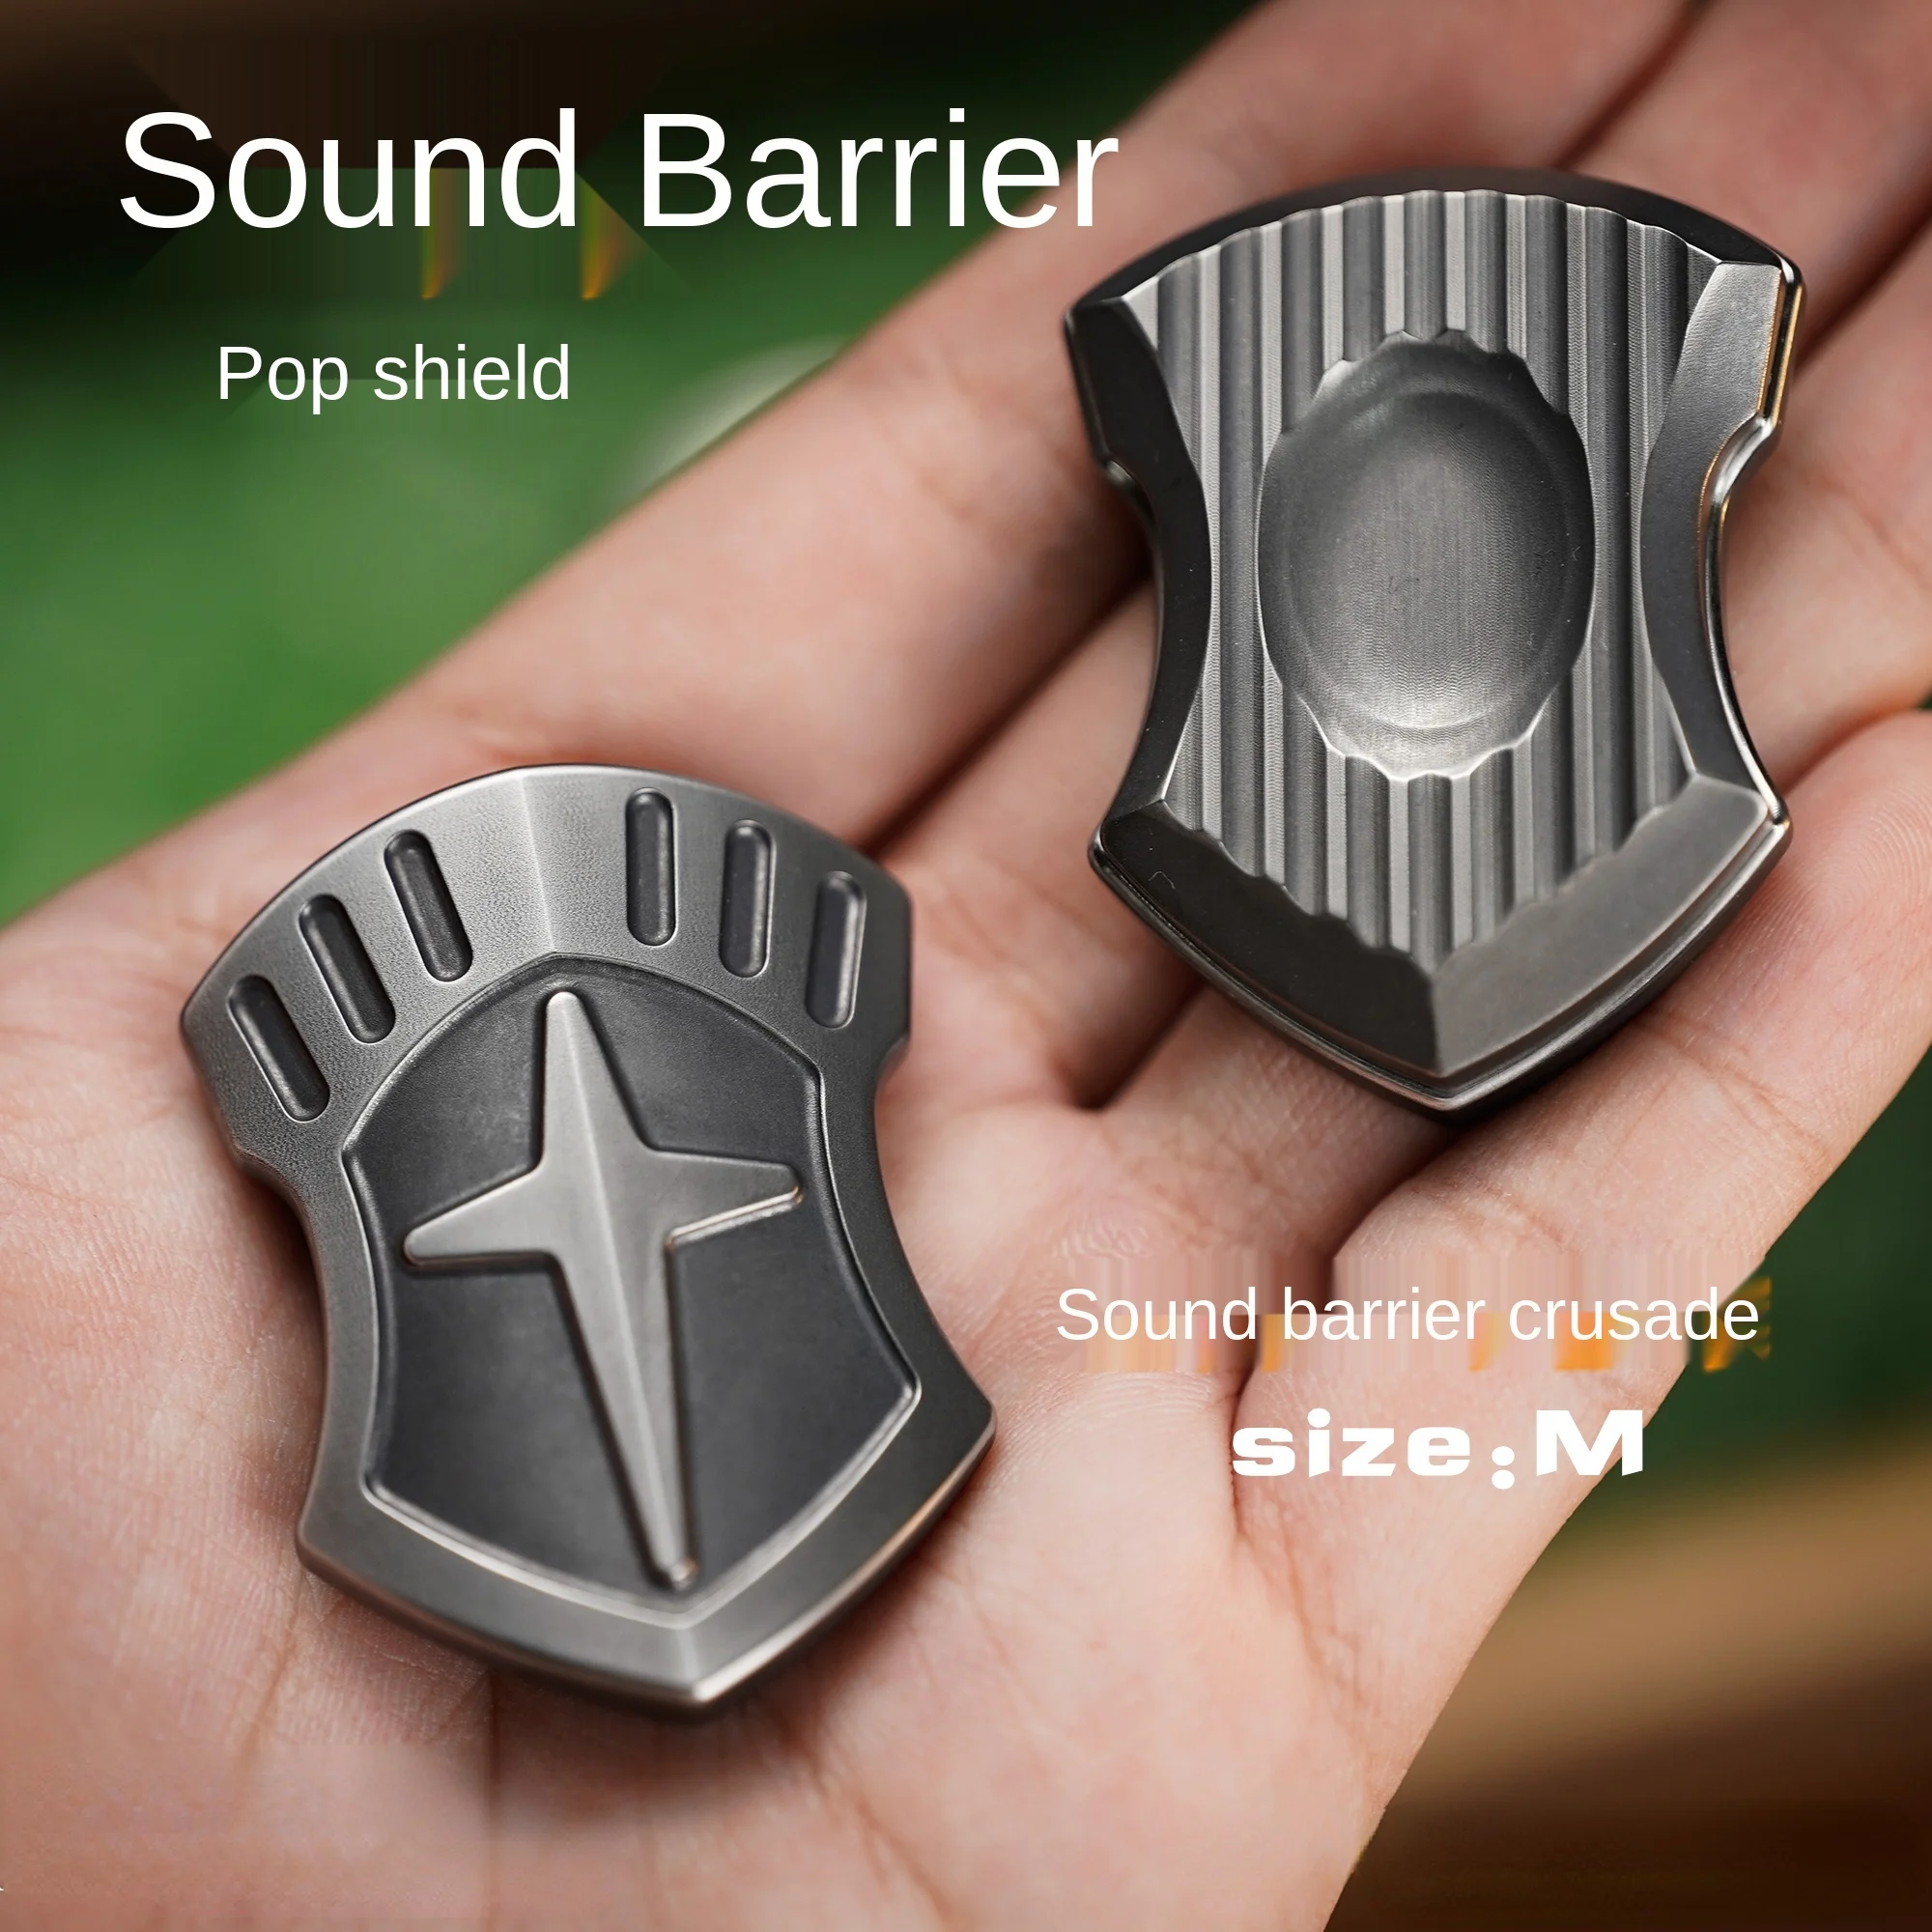 EDC Pop Shield First Generation Sound Barrier Cross Riding Army Push Brand Pop Coin Metal Toy Useful Tool for Pressure Reduction enlarge